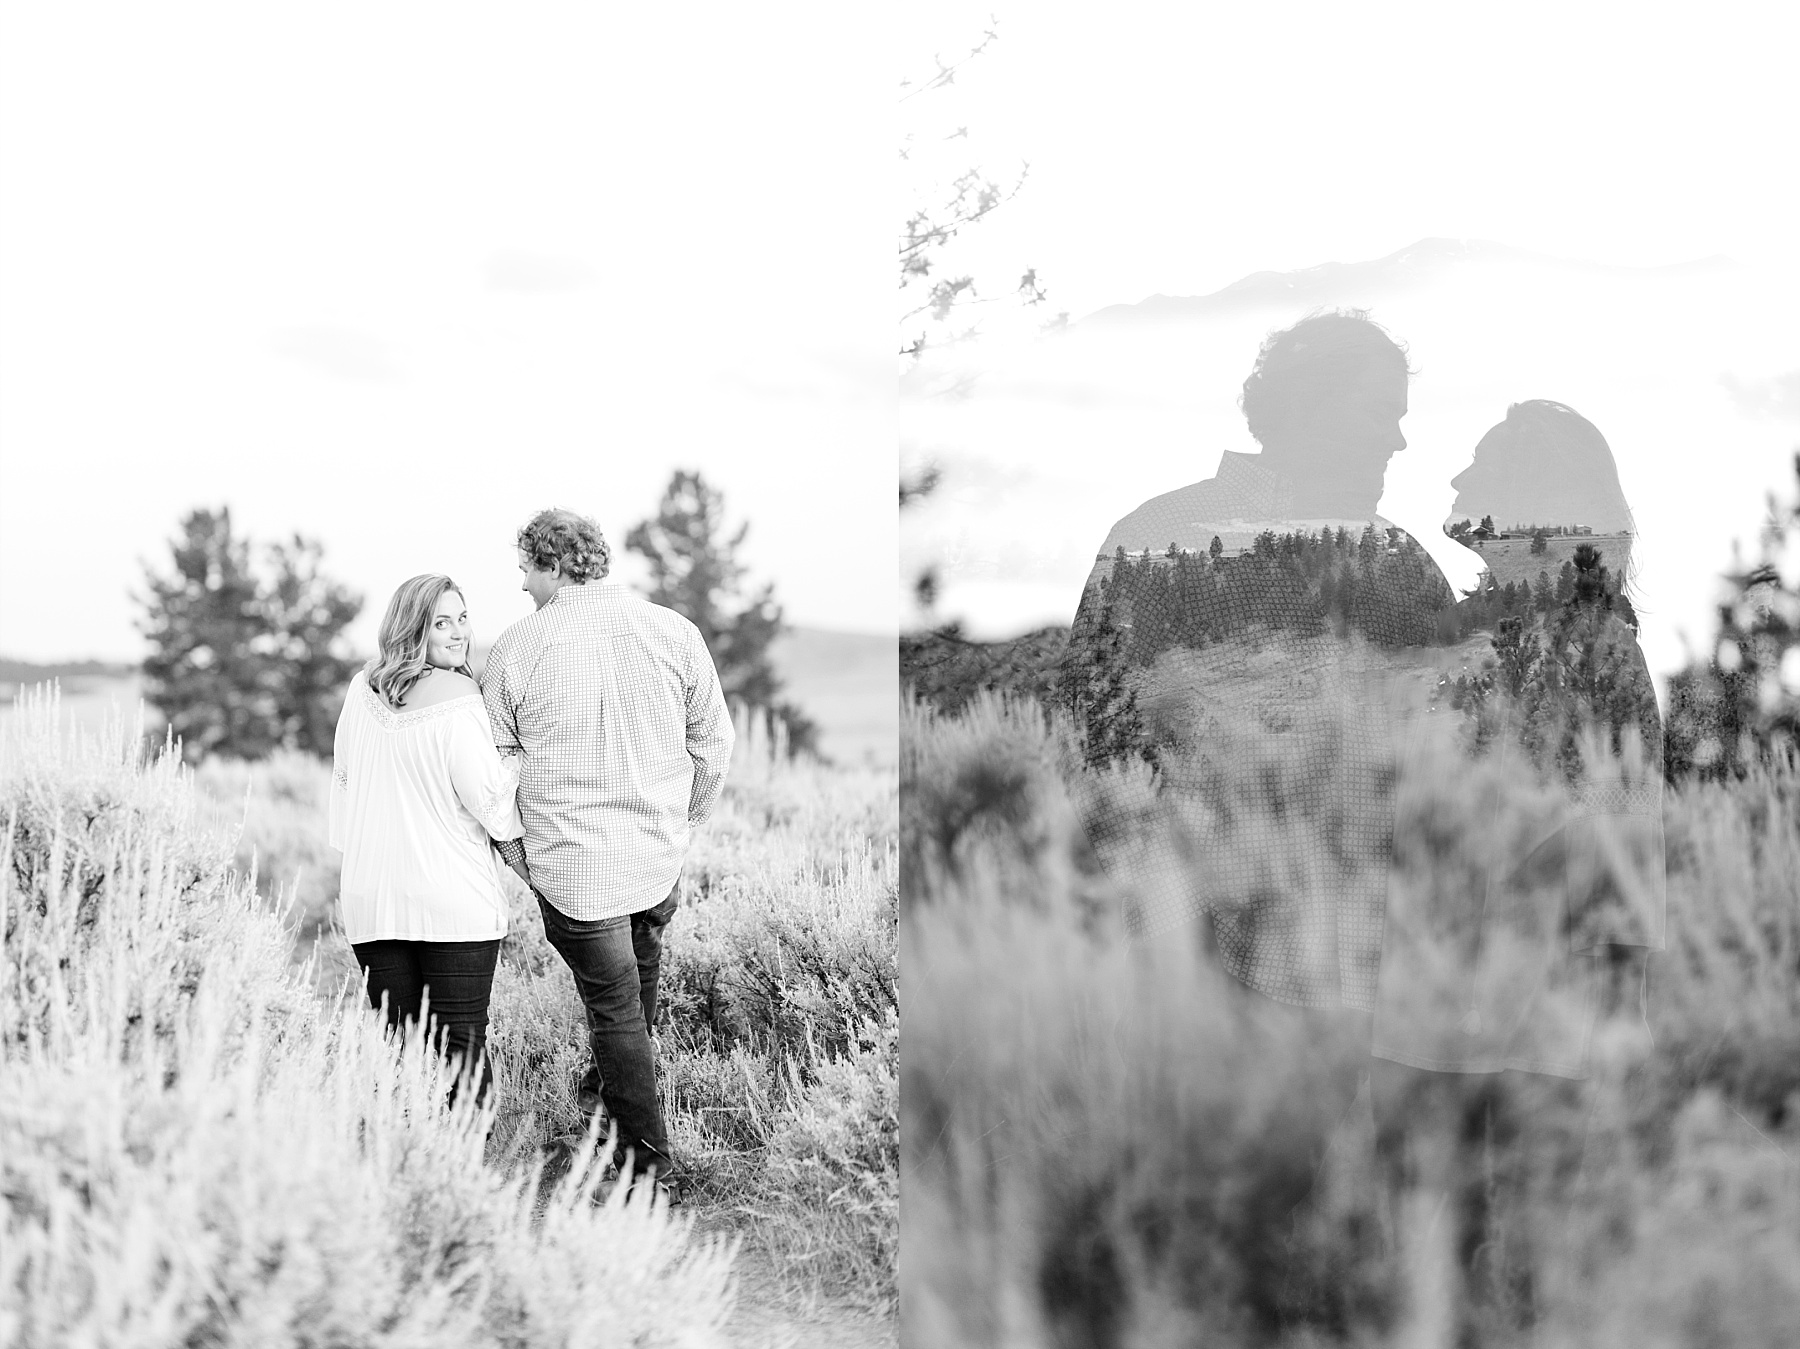 Set in the mountains, Maggie & Justin's Missoula, Montana engagement photos were made of dreams.